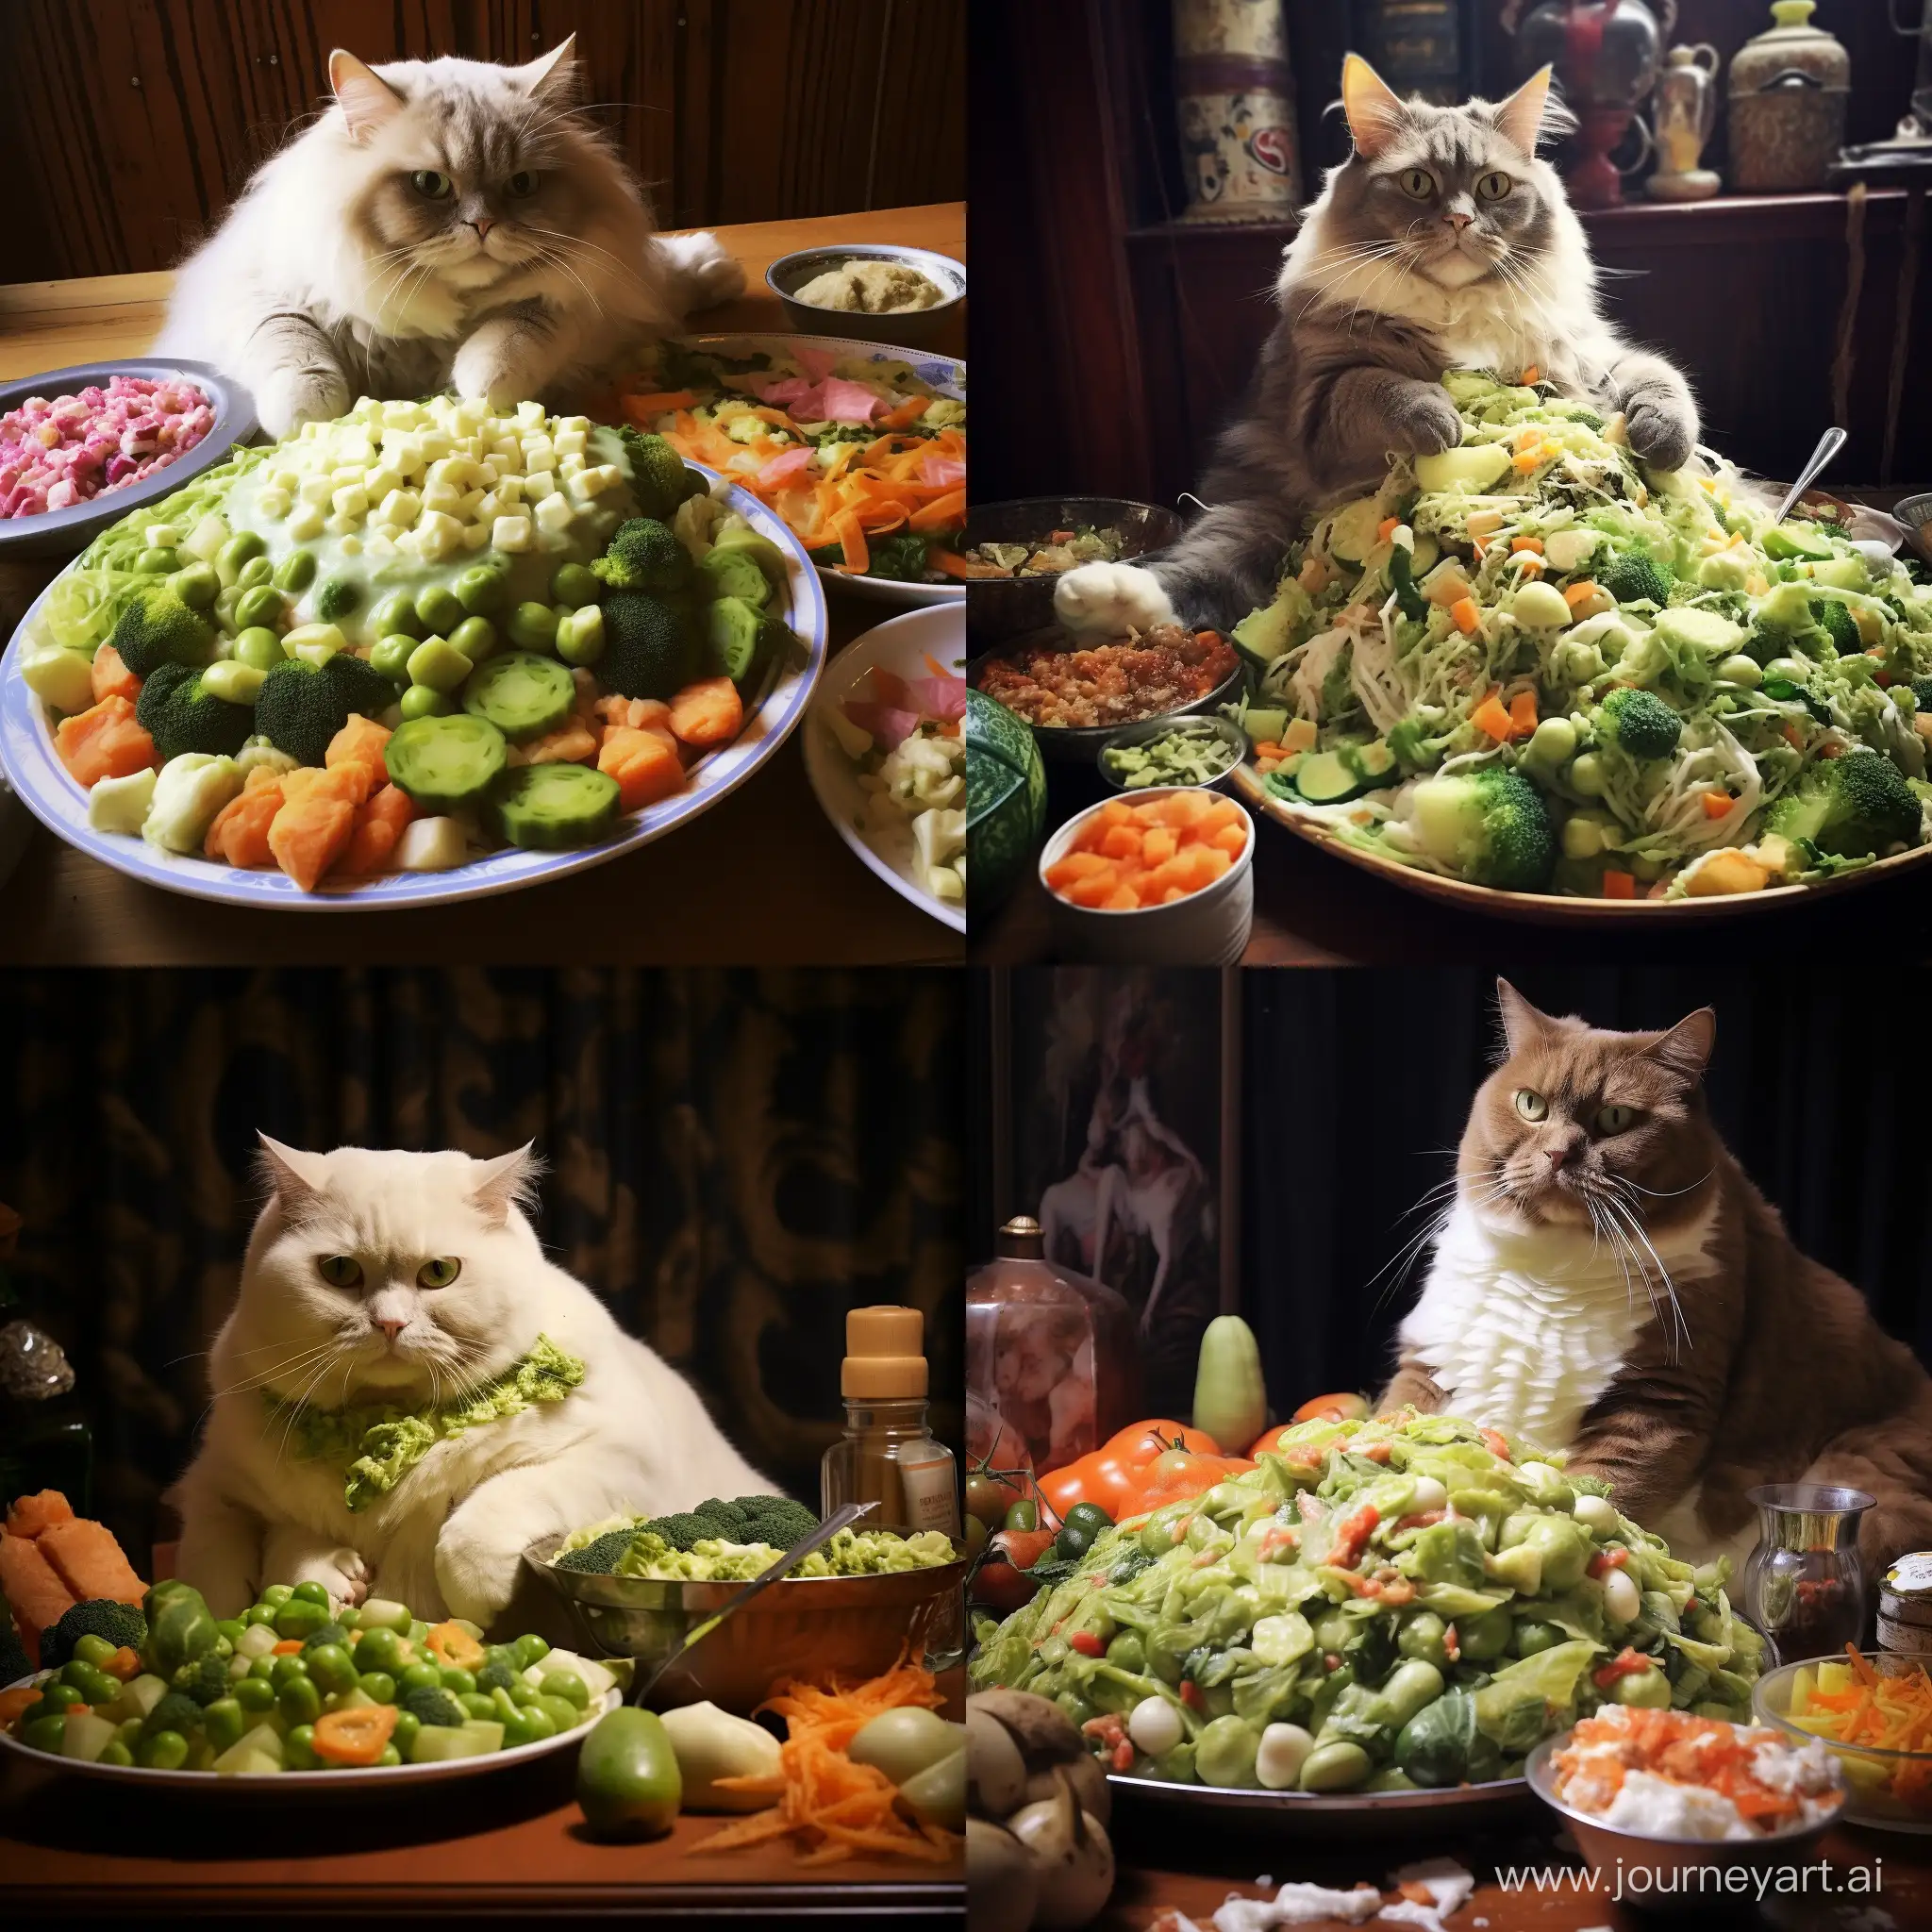 Enormous-Universes-Cat-Indulging-in-Olivier-Salad-Feast-with-Scattered-Peas